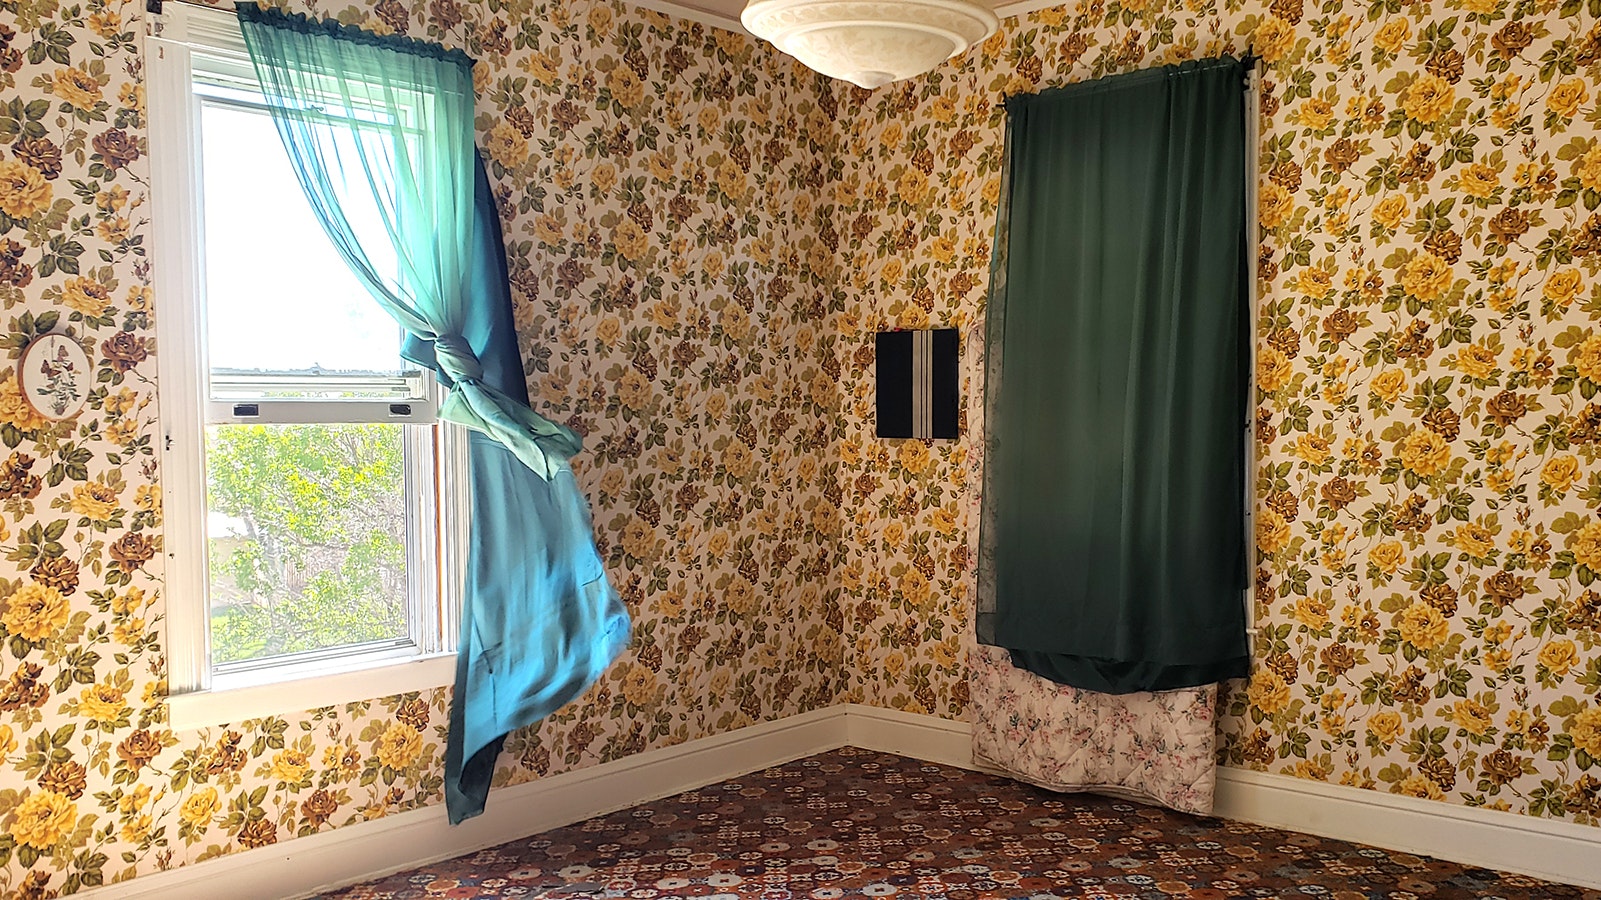 One of the five bedrooms at the J.B. Okie Mansion. All of the rooms are getting new carpet.